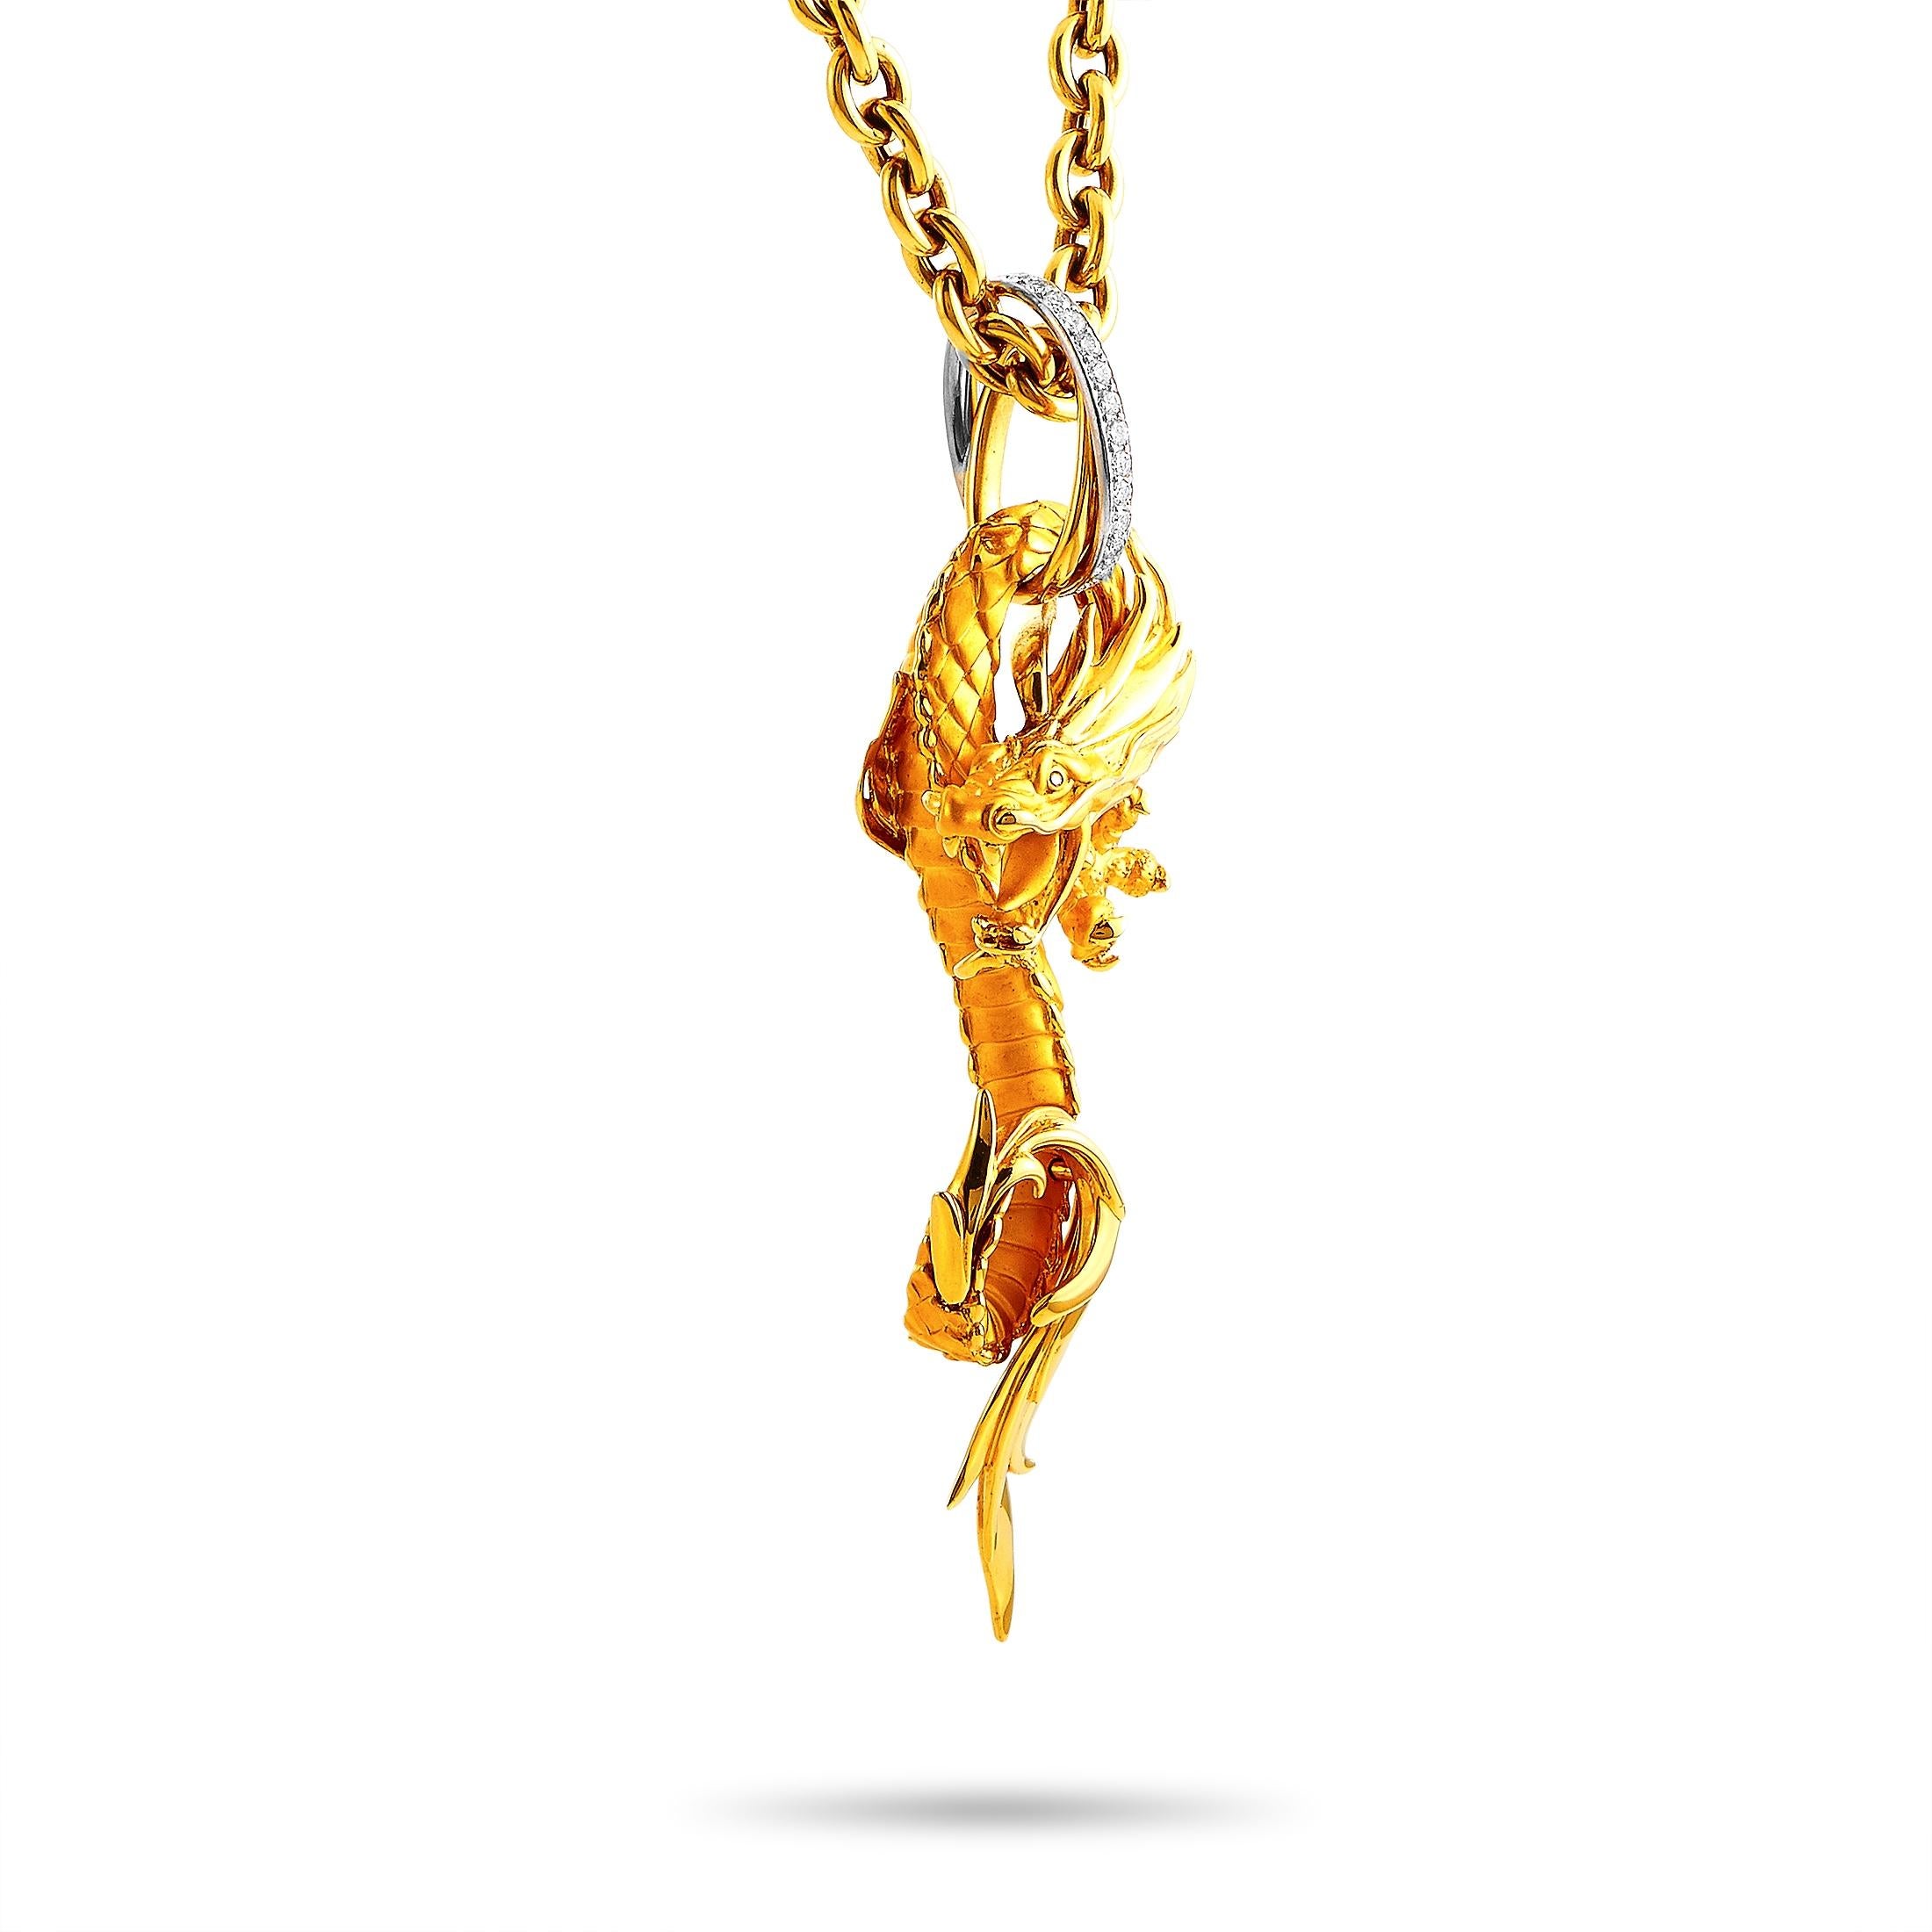 The Carrera y Carrera “Maxi Dragons” necklace is made out of 18K yellow and white gold and embellished with diamonds that total 0.40 carats. The necklace weighs 80.9 grams and is presented with a 30” chain and a pendant that measures 3.50” in length